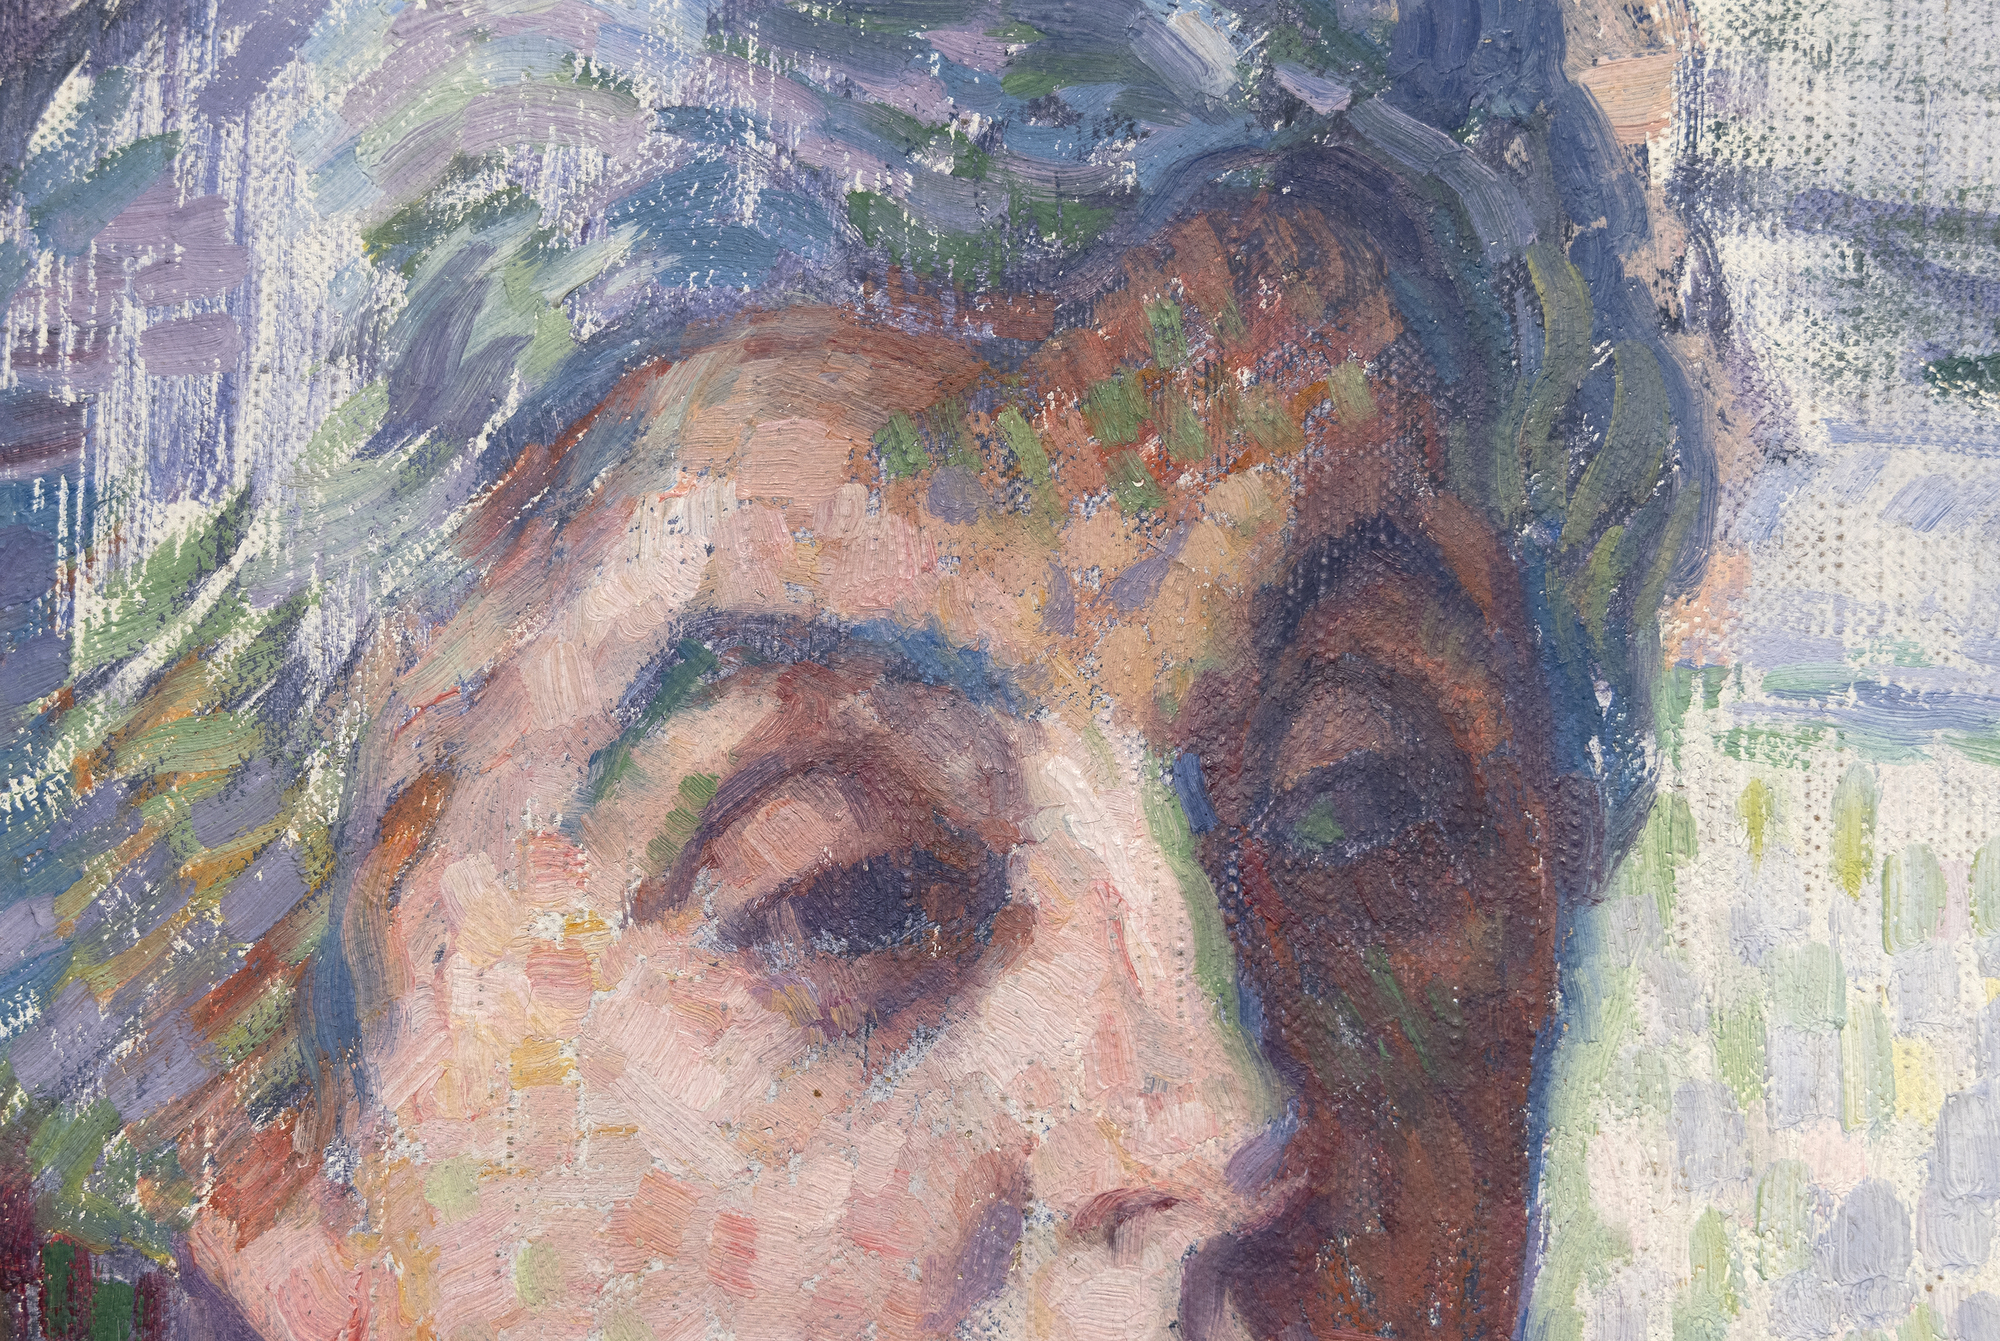 An undisputed master of the booming Belgian Neo-Impressionist movement from 1887 onward, Théo van Rysselberghe painted this portrait of his wife, Maria (née Monnom) during the first decade of the twentieth century. He had pressed onward from the influence of Whistler’s Tonalism, Impressionism, and the Pointillism of Seurat to perfect a highly refined understanding of color, its harmonic resonances, and a meticulous rendering of formal elements. An exemplary draftsman, optical impressions based on color interactions remained a principal concern for Van Rysselberghe. Here, short strokes of color replaced the small dots of a Pointillist, and the color scheme is not the homogenized, harmonious one for which the artist has a well-deserved reputation. Rather, this portrait advances color theory in an entirely different manner. Its visual interest rests with the dynamic contrasts of his wife’s silvered coiffure, her platinum-hued dress, and the stark-white fireplace mantle — all staged within the optical vibrancy of the surround dominated by complementary reds and greens. It is a visually stimulating demonstration by a painter who understood the dynamic impact of this unusual color scheme and who arranged the sitter with a strong accent on a diagonal and executed the formula with the craft and agility of a painter in full control of his painterly assets.